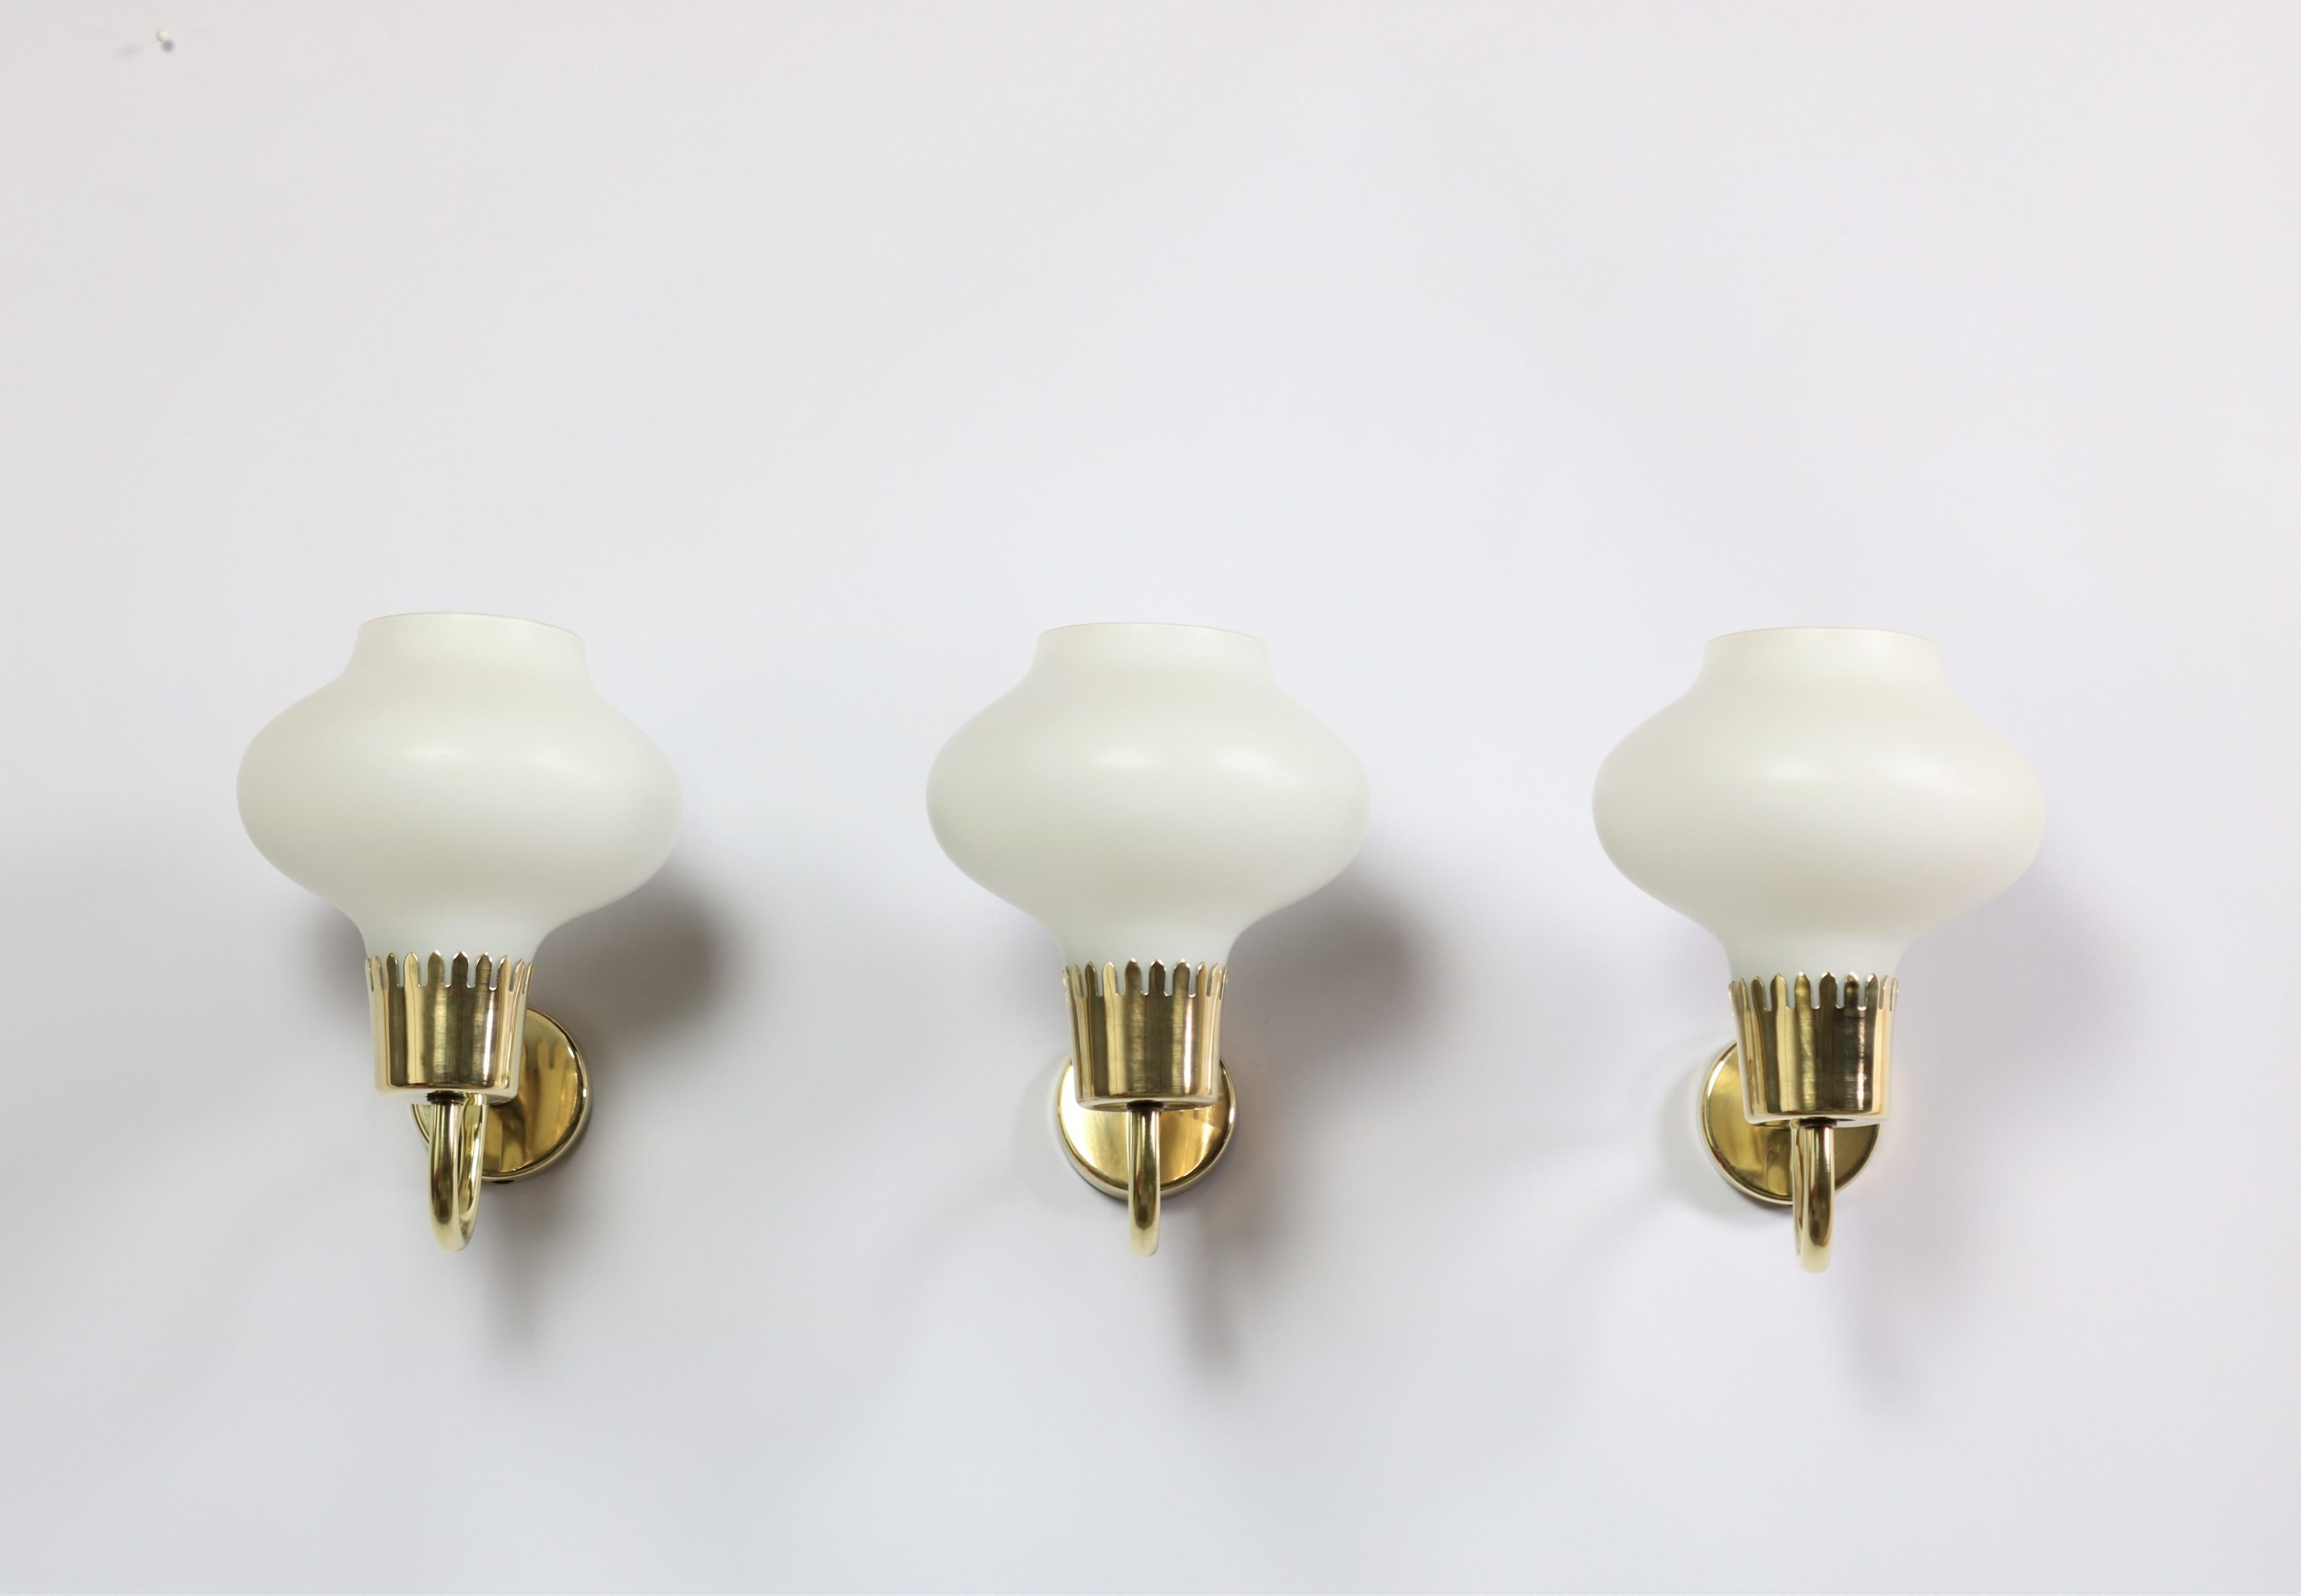 Beautiful set of three wall sconces in mouth-blown opal glass and solid brass. Produced by Fog & Morup in Denmark in the 1950s and designed by architect Acton Bjorn. Bjorn collaborated with Vilhelm Lauritzen in the 1930-1940 and the influence from